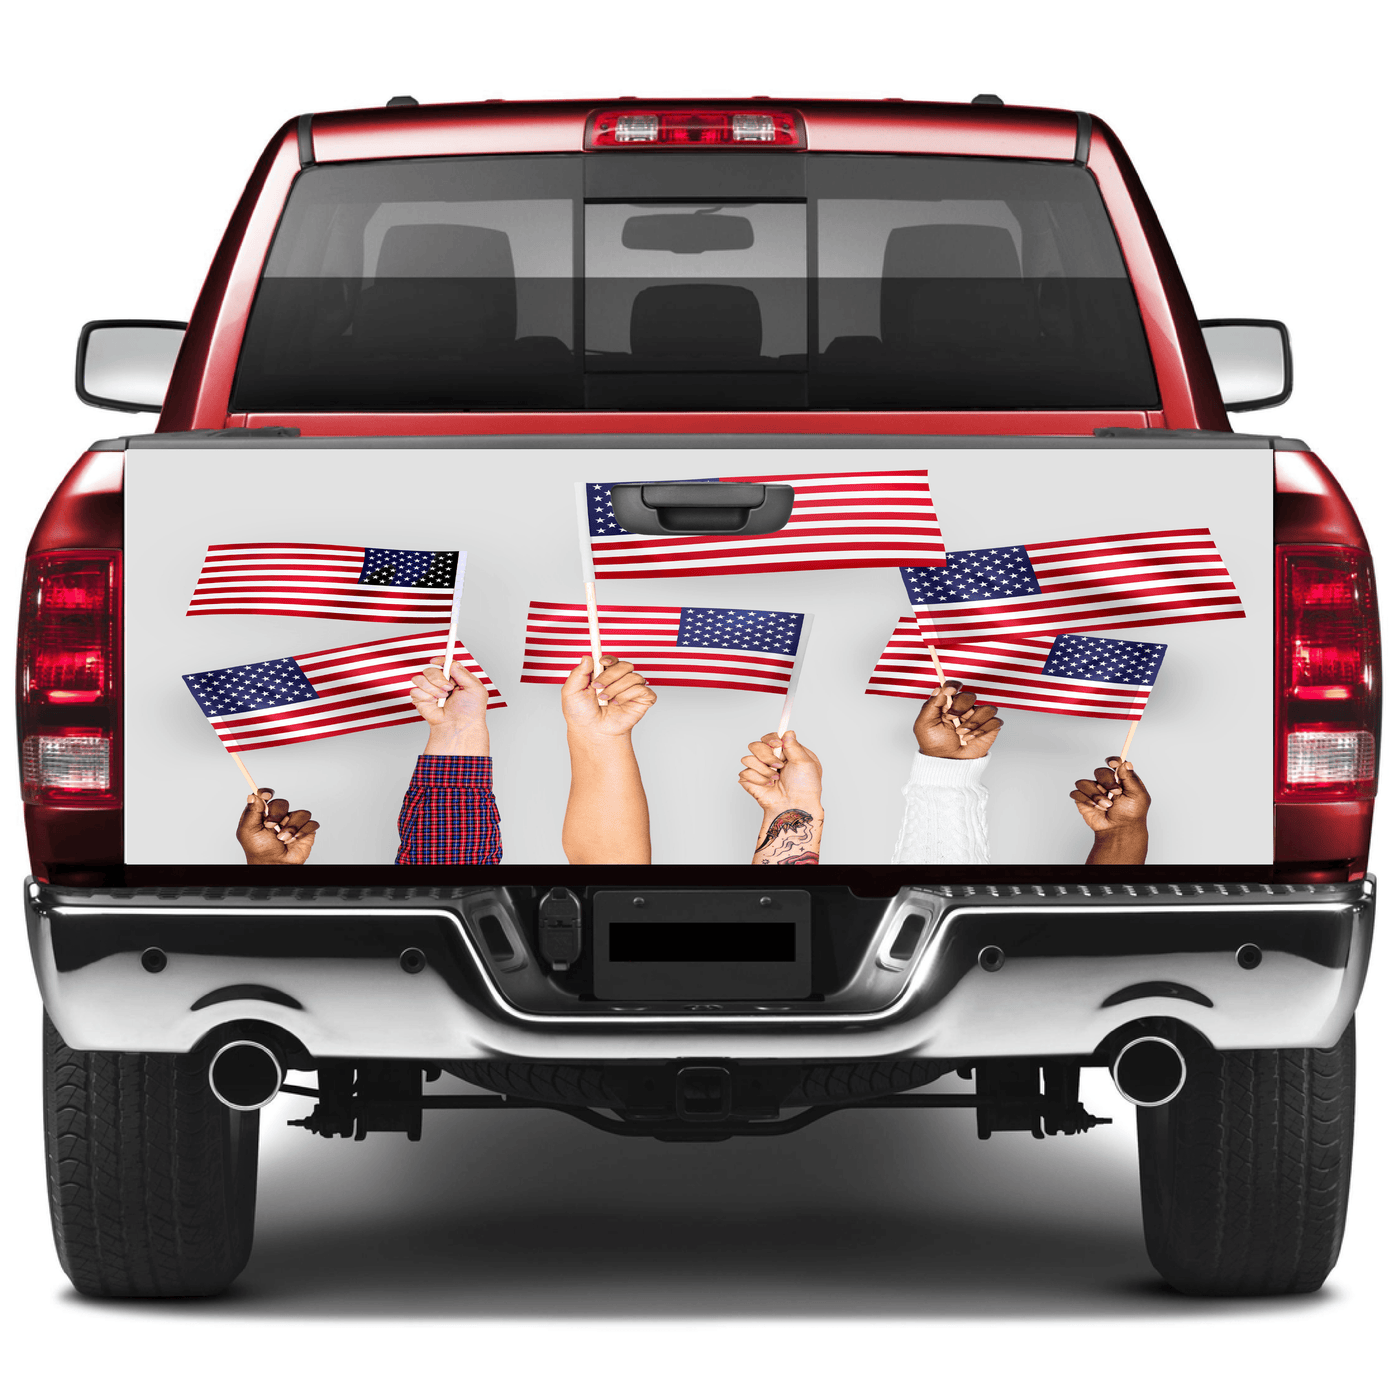 American Flag Tailgate Wrap People Holding Usa Wraps For Trucks Wrap Vinyl Car Decals SUV Sticker